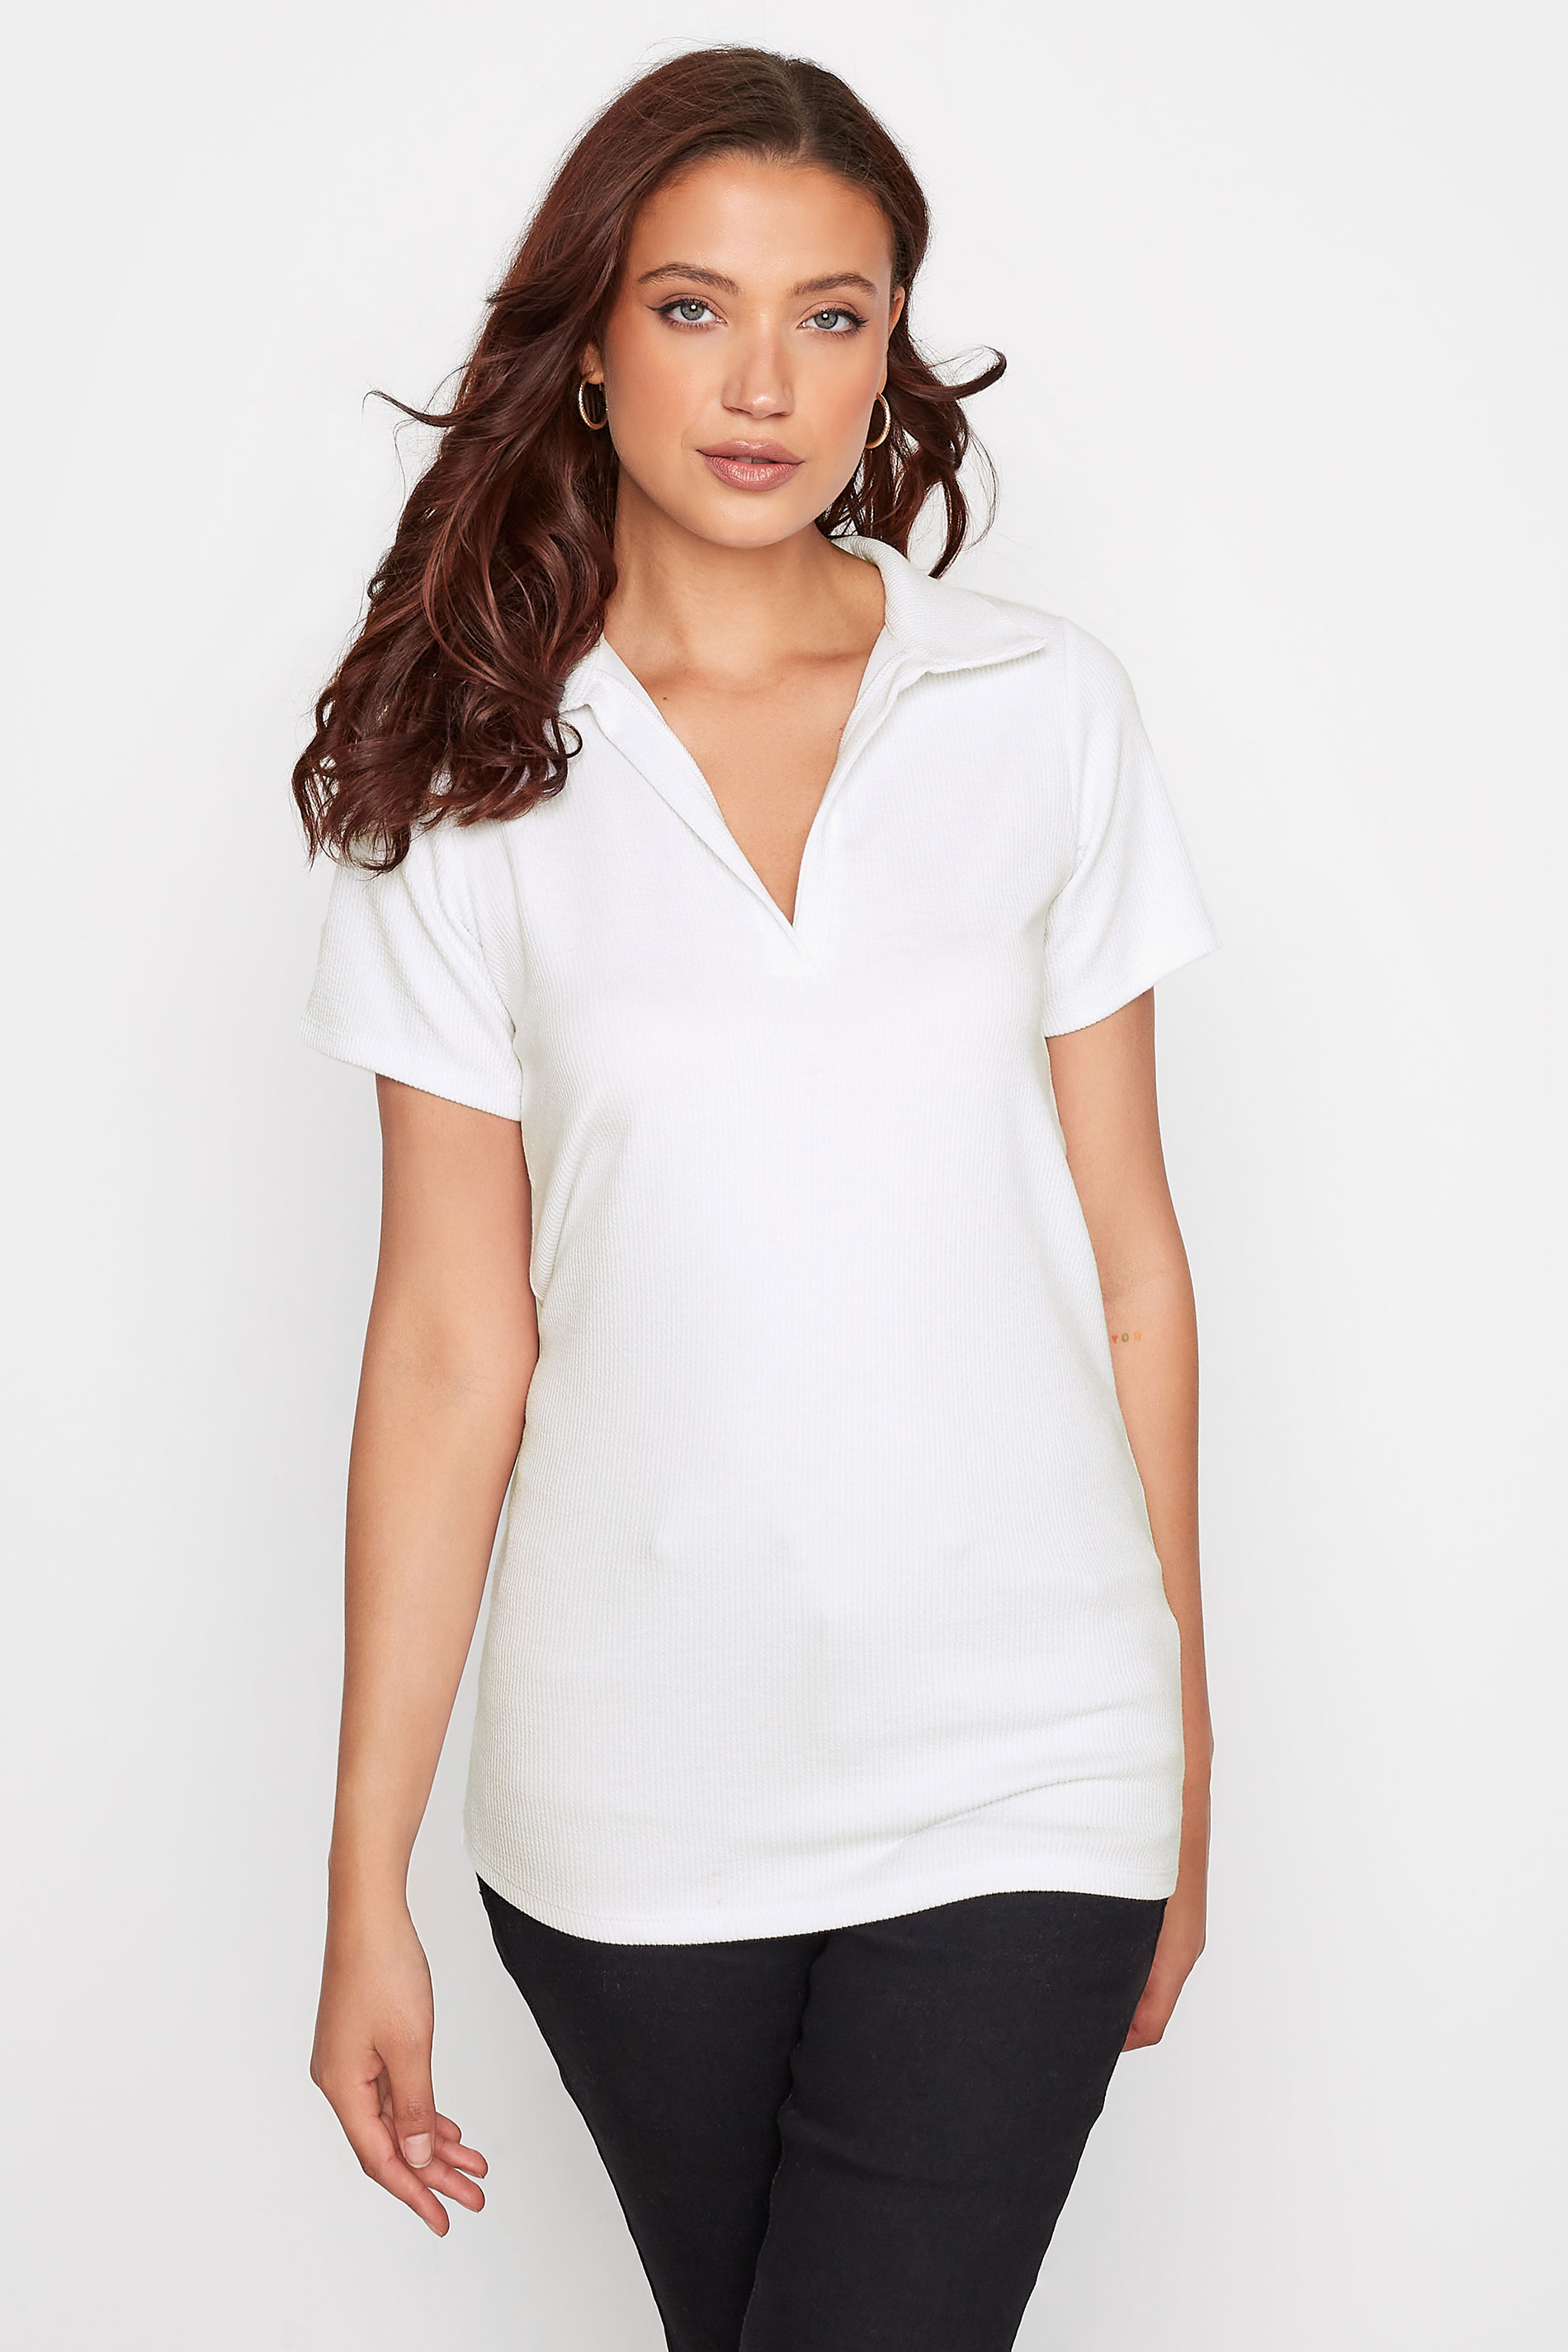 LTS Tall White Short Sleeve Collared Top 1